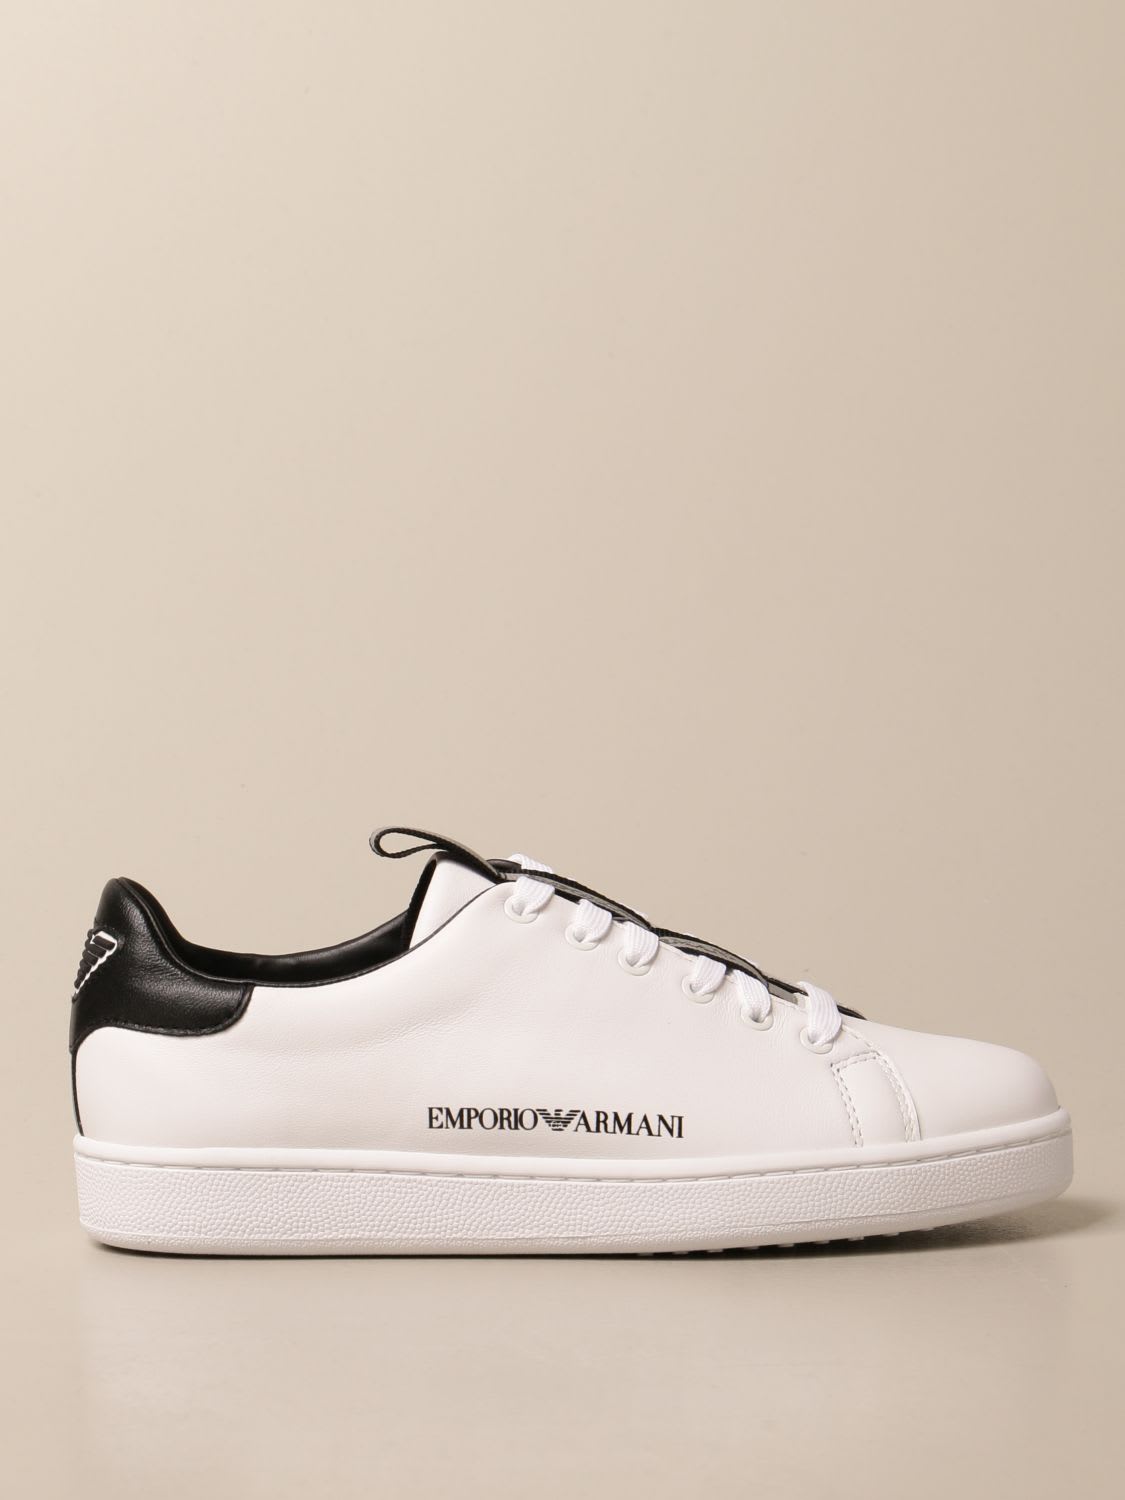 EMPORIO ARMANI SNEAKERS IN LEATHER WITH LOGO,X3X132 XM789 D611